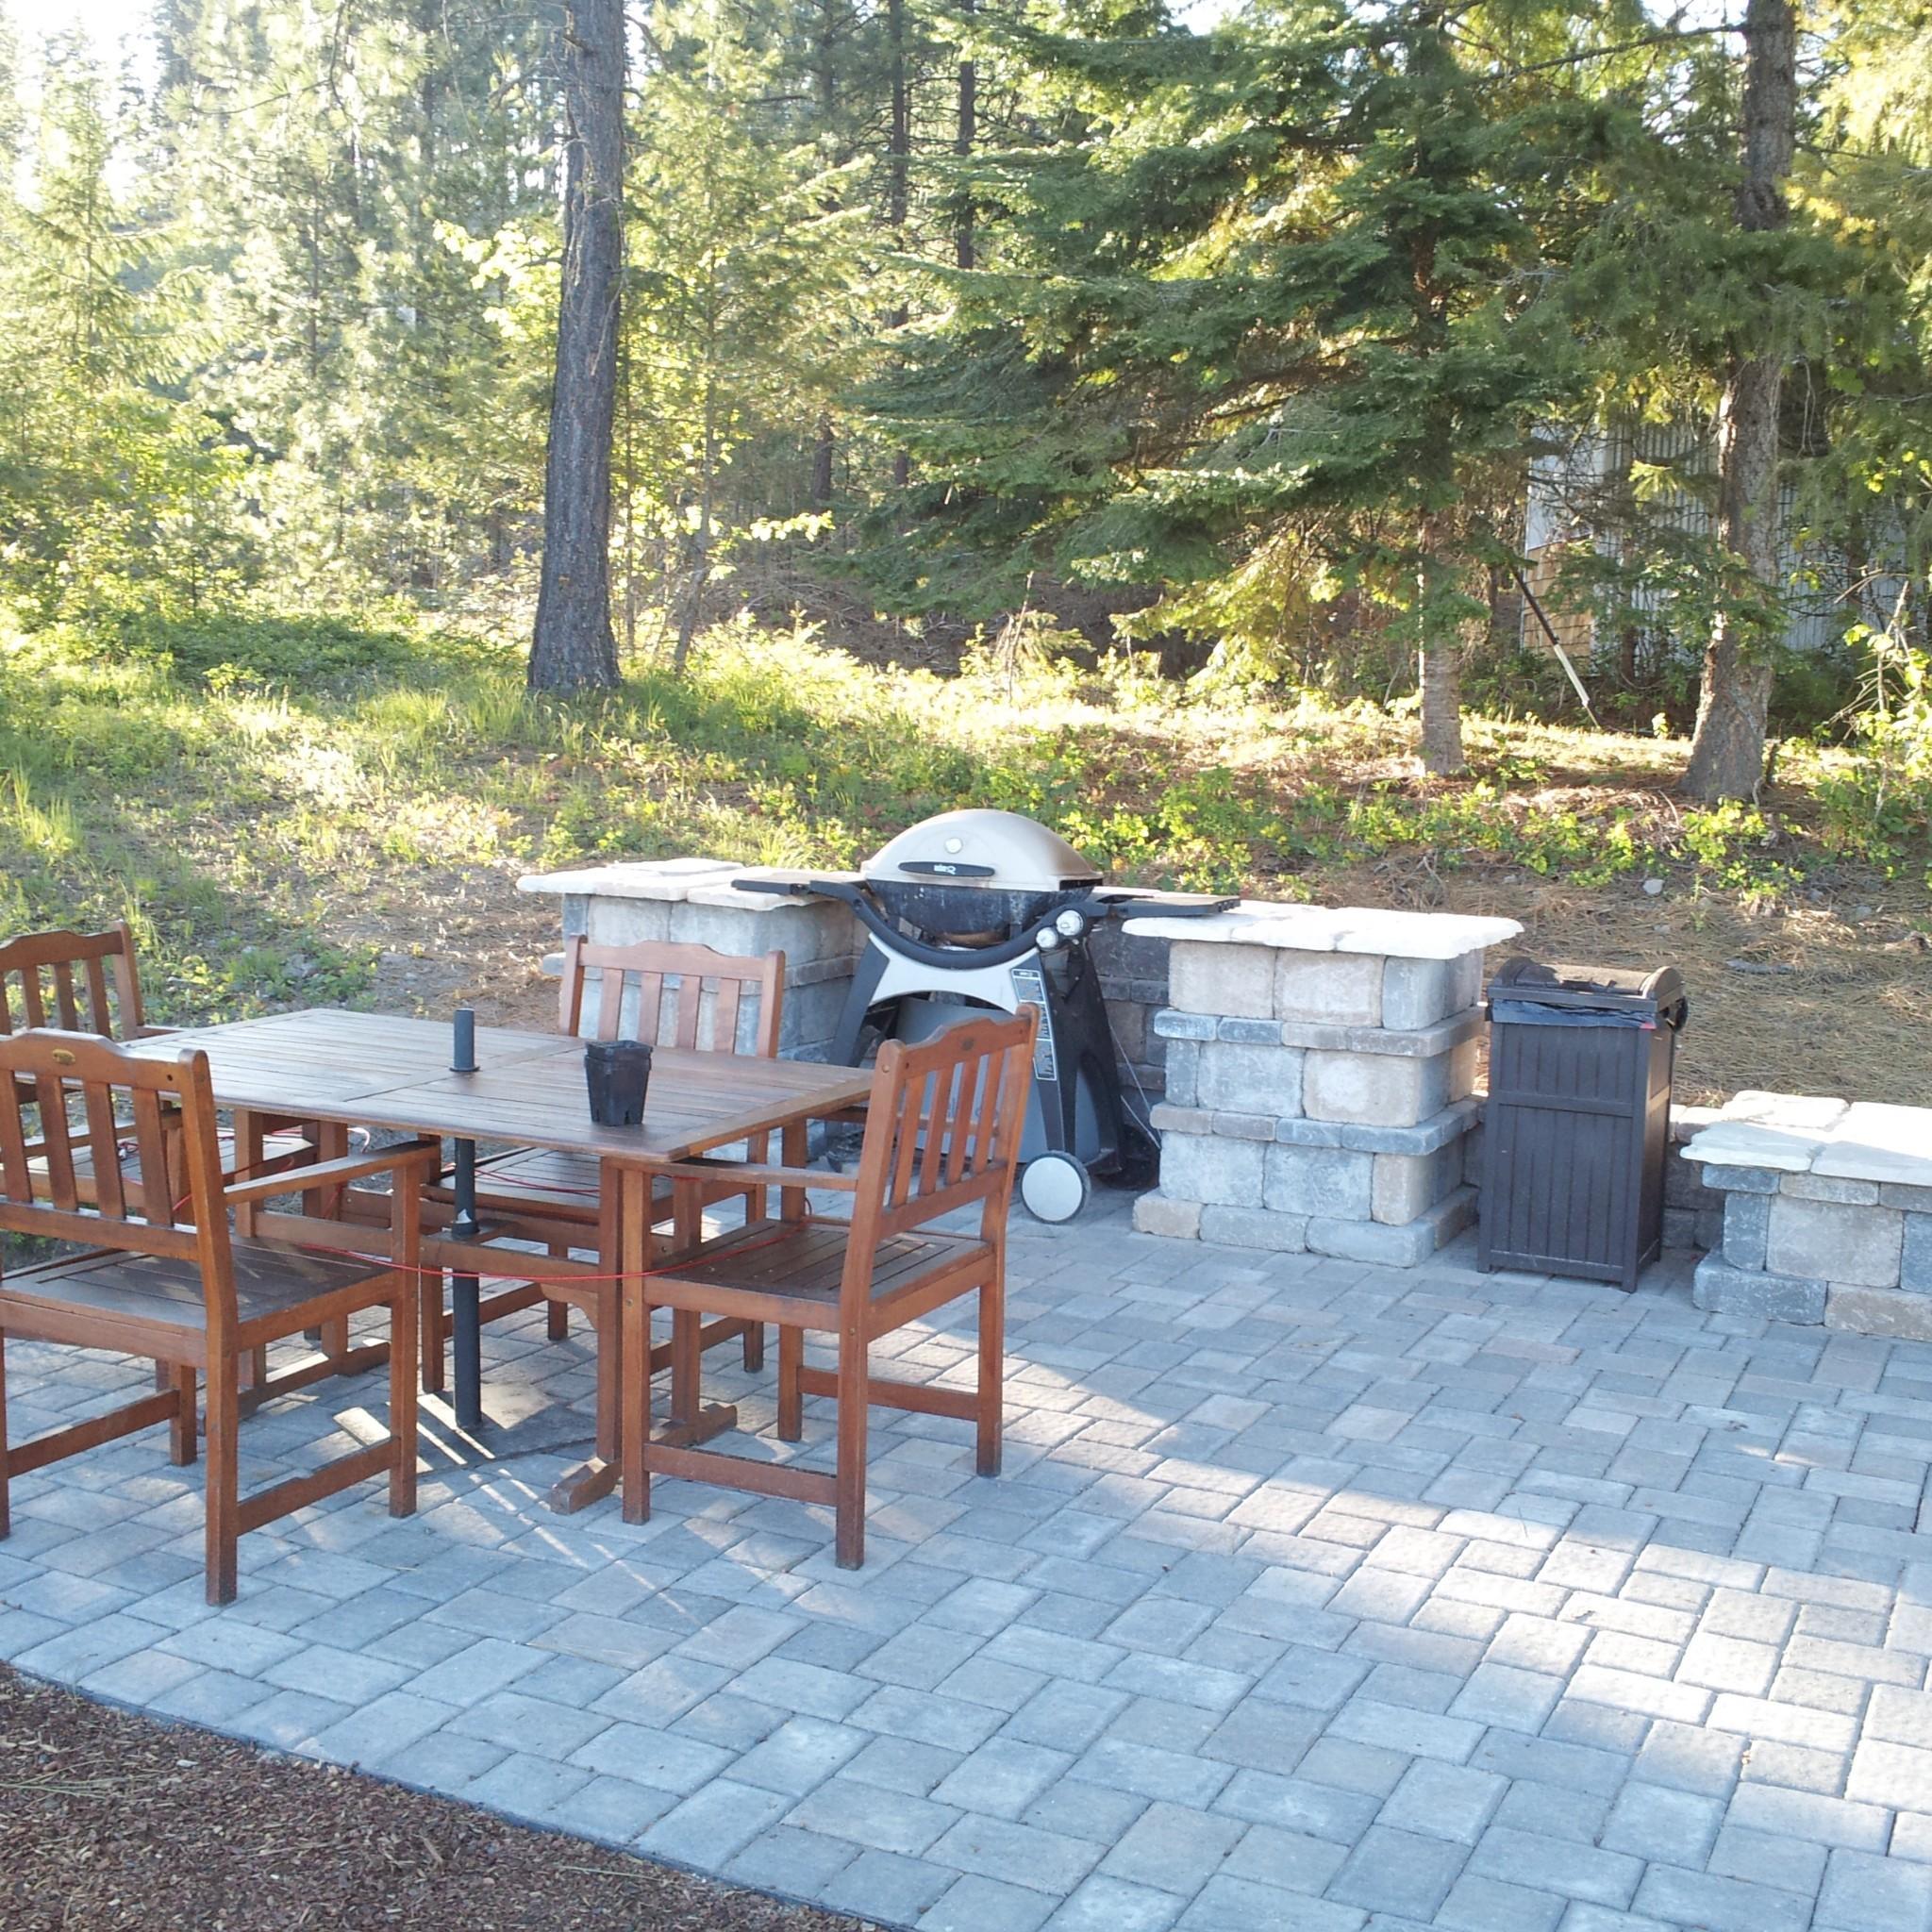 Outdoor living a 20 x 20 paver patio with a tumble stone barbecue area. 2013